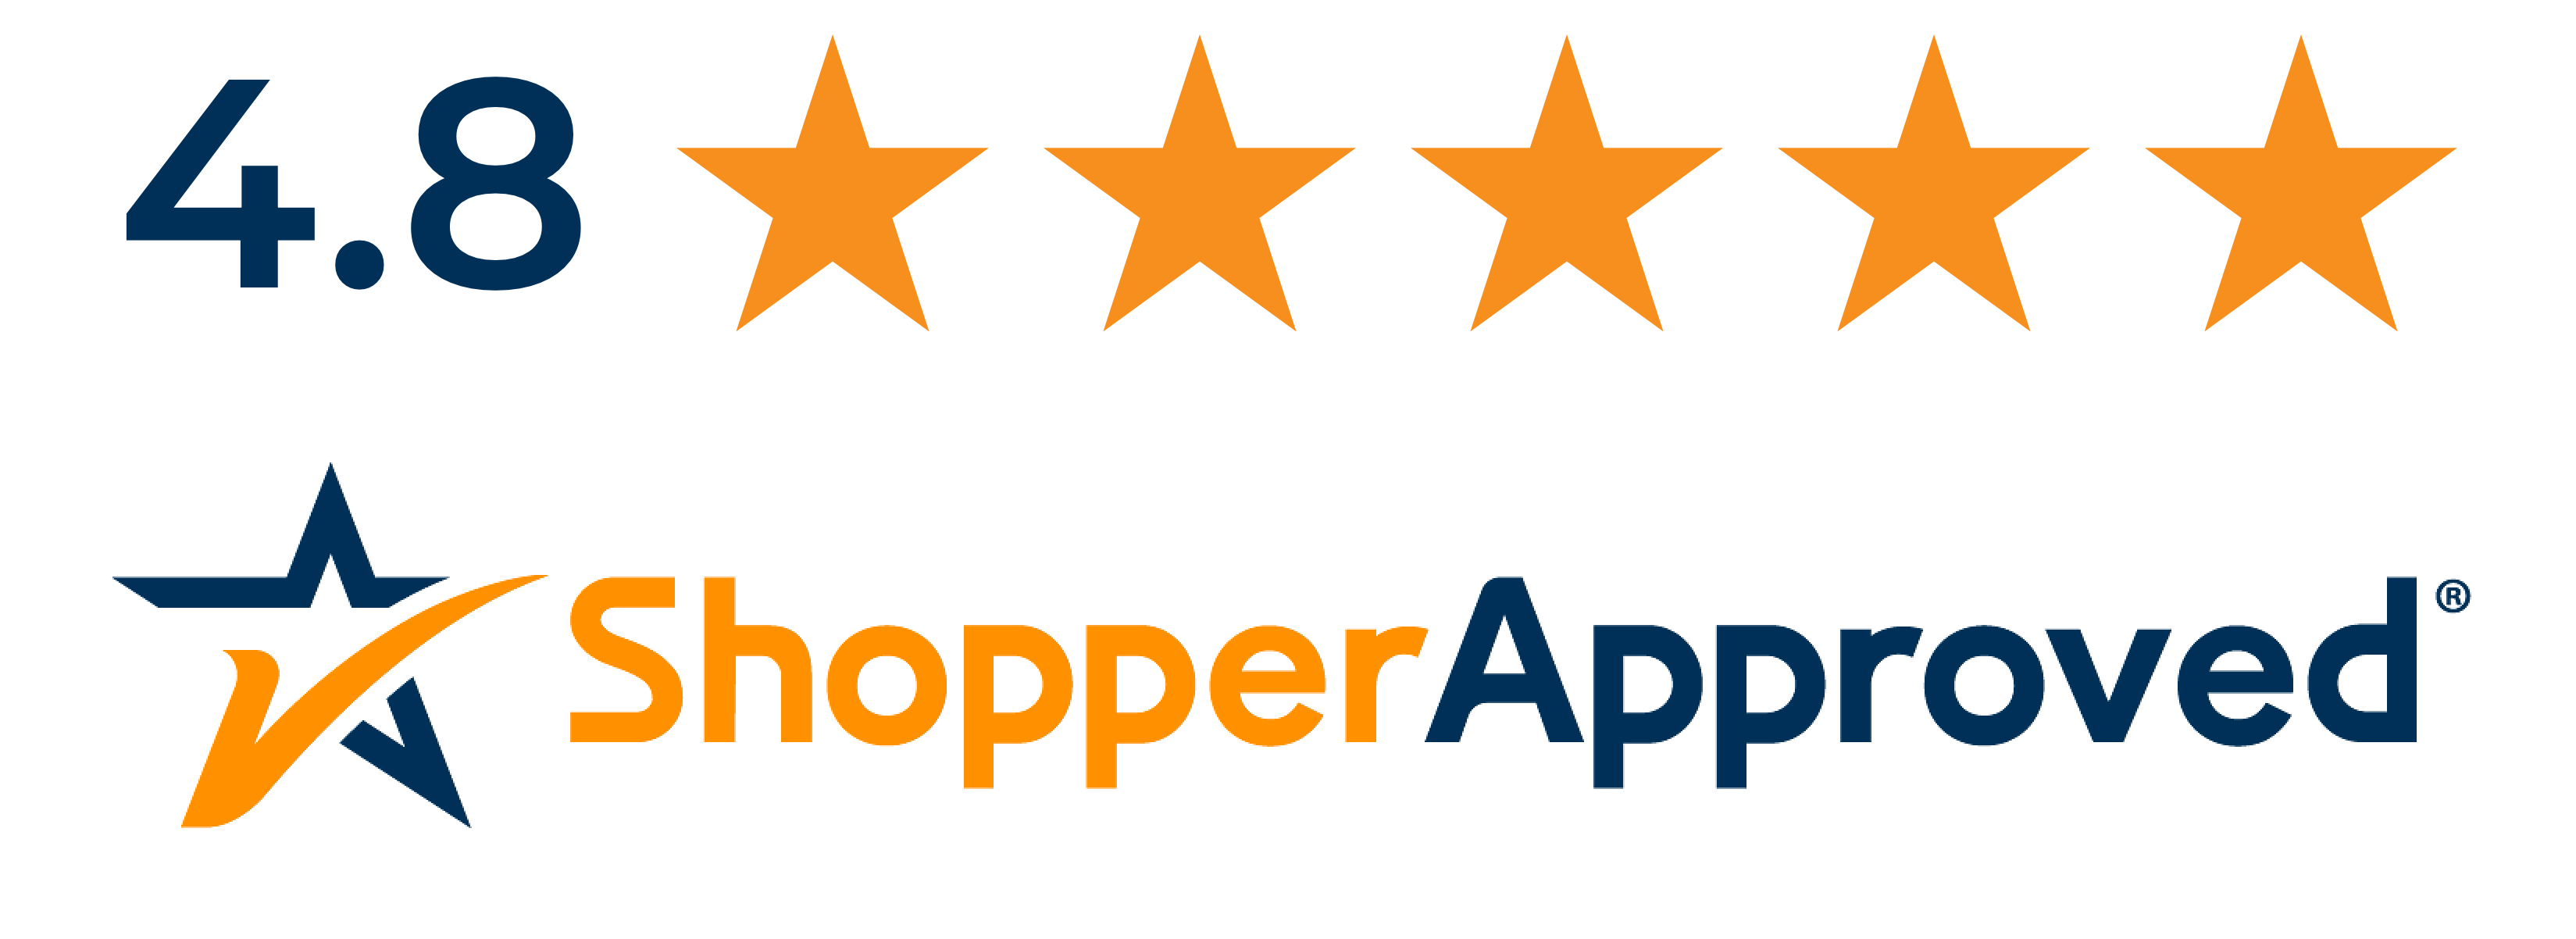 Shopper Approved logo with 5-stars representing 4.8 average review.